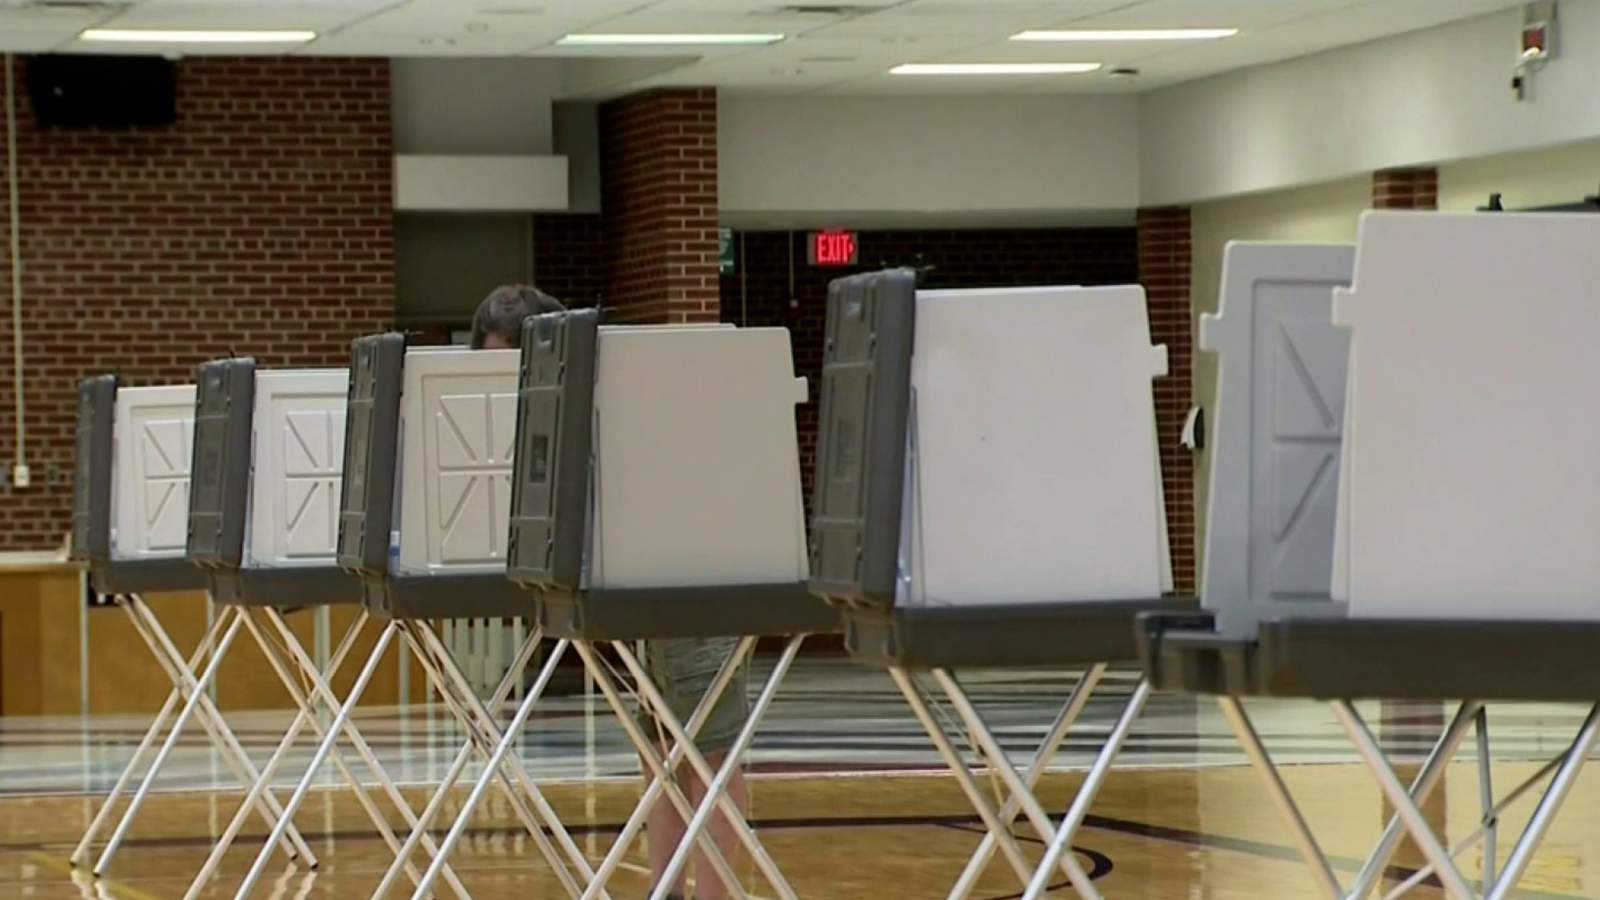 Michigan Gov. Gretchen Whitmer addresses election concerns with record voter turnout expected